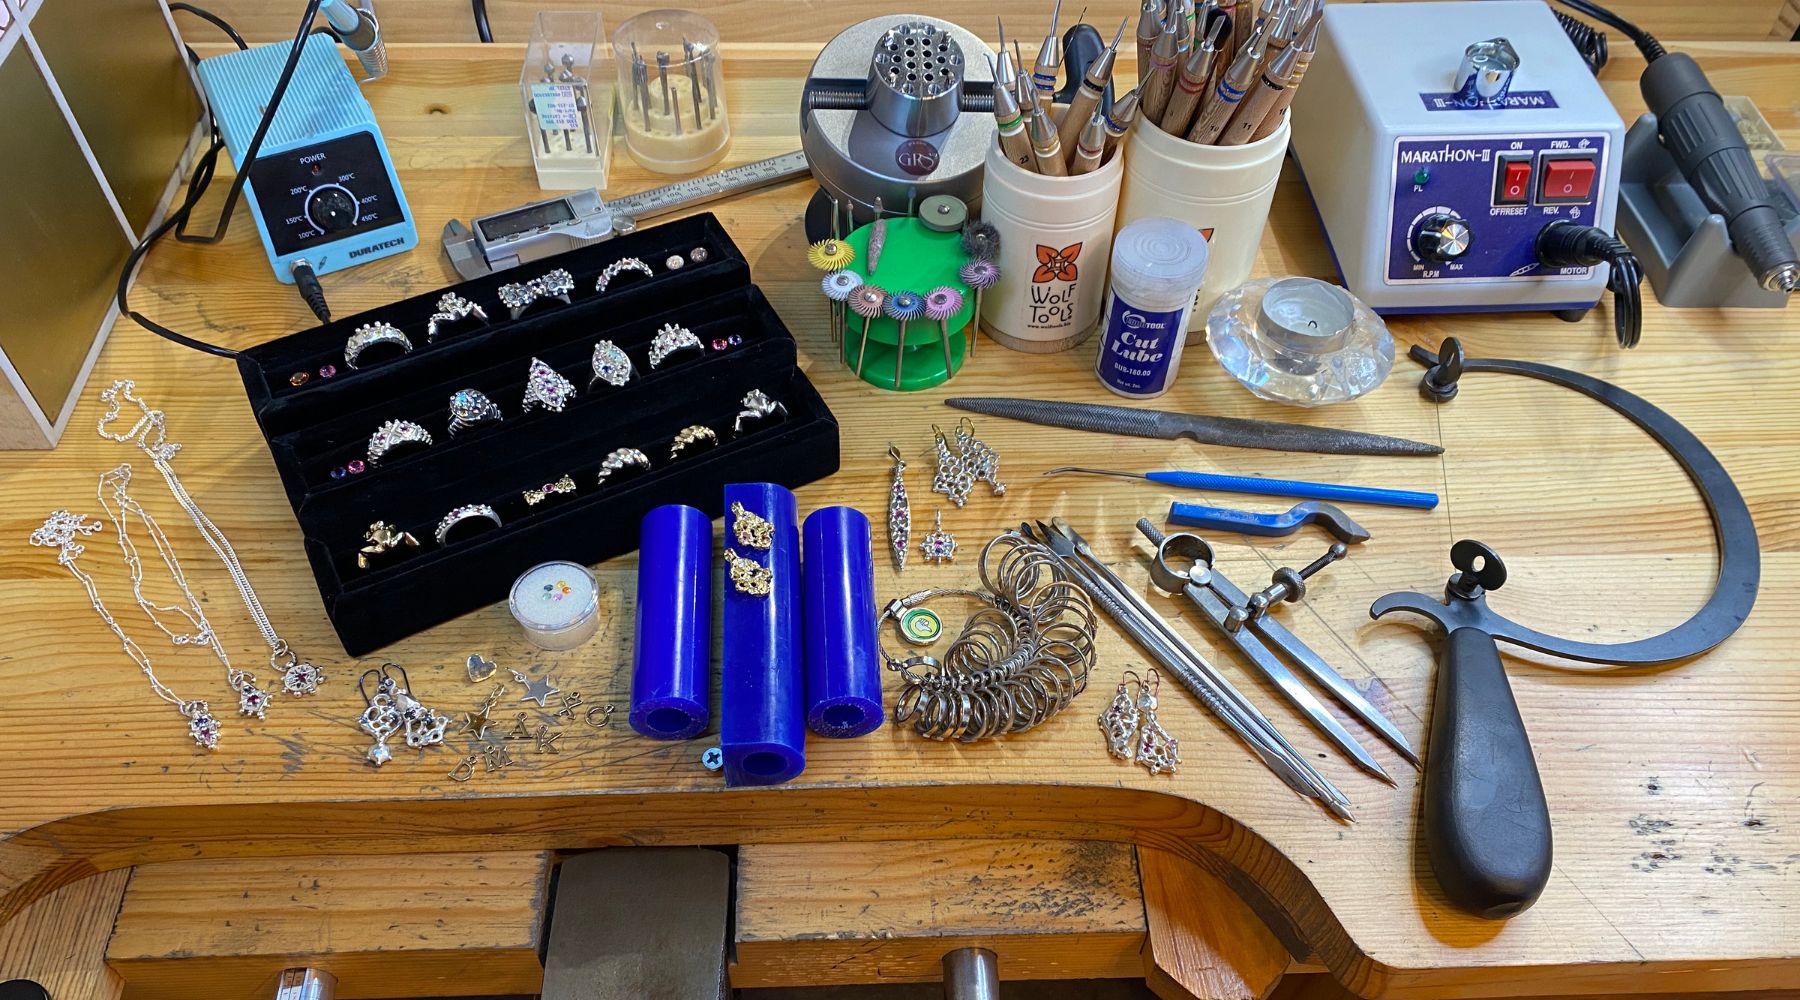 Madame Mak Jewellery Workbench in Melbourne, Australia. The image showcases a well-organized work area with a wooden jewelry bench placed against a wall. The bench is equipped with various tools and materials for jewelry making, including pliers, hammers, and  Madame Mak Jewellery